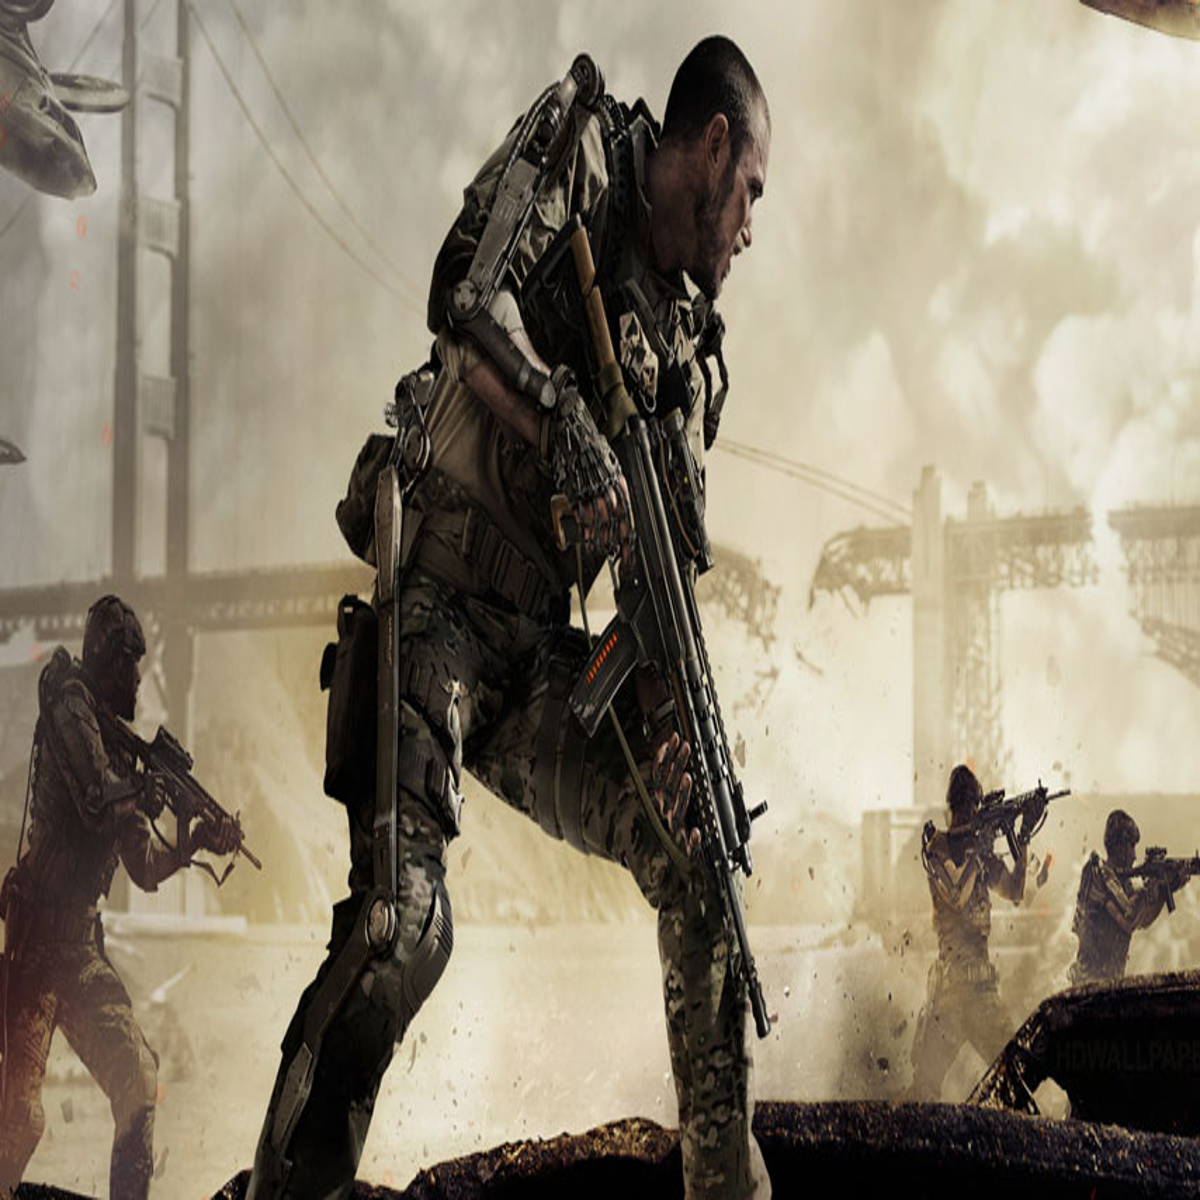 Advanced Warfare 2 rumoured to release for next Sledgehammer Call of Duty